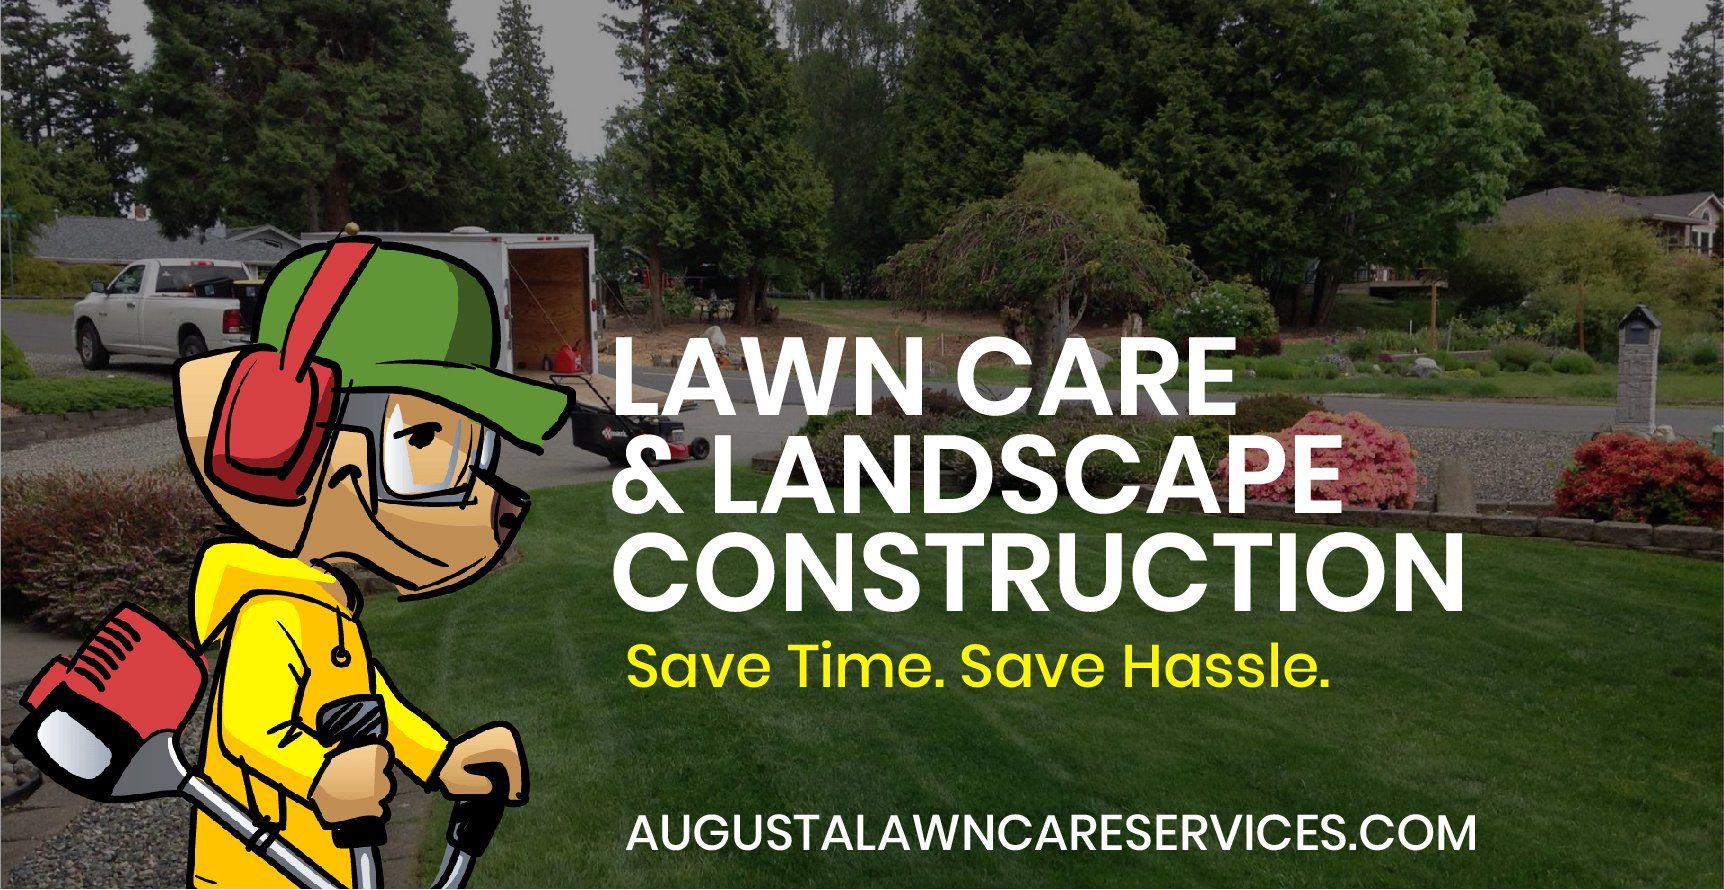 Augusta Lawn Care of Stanwood-Camano logo